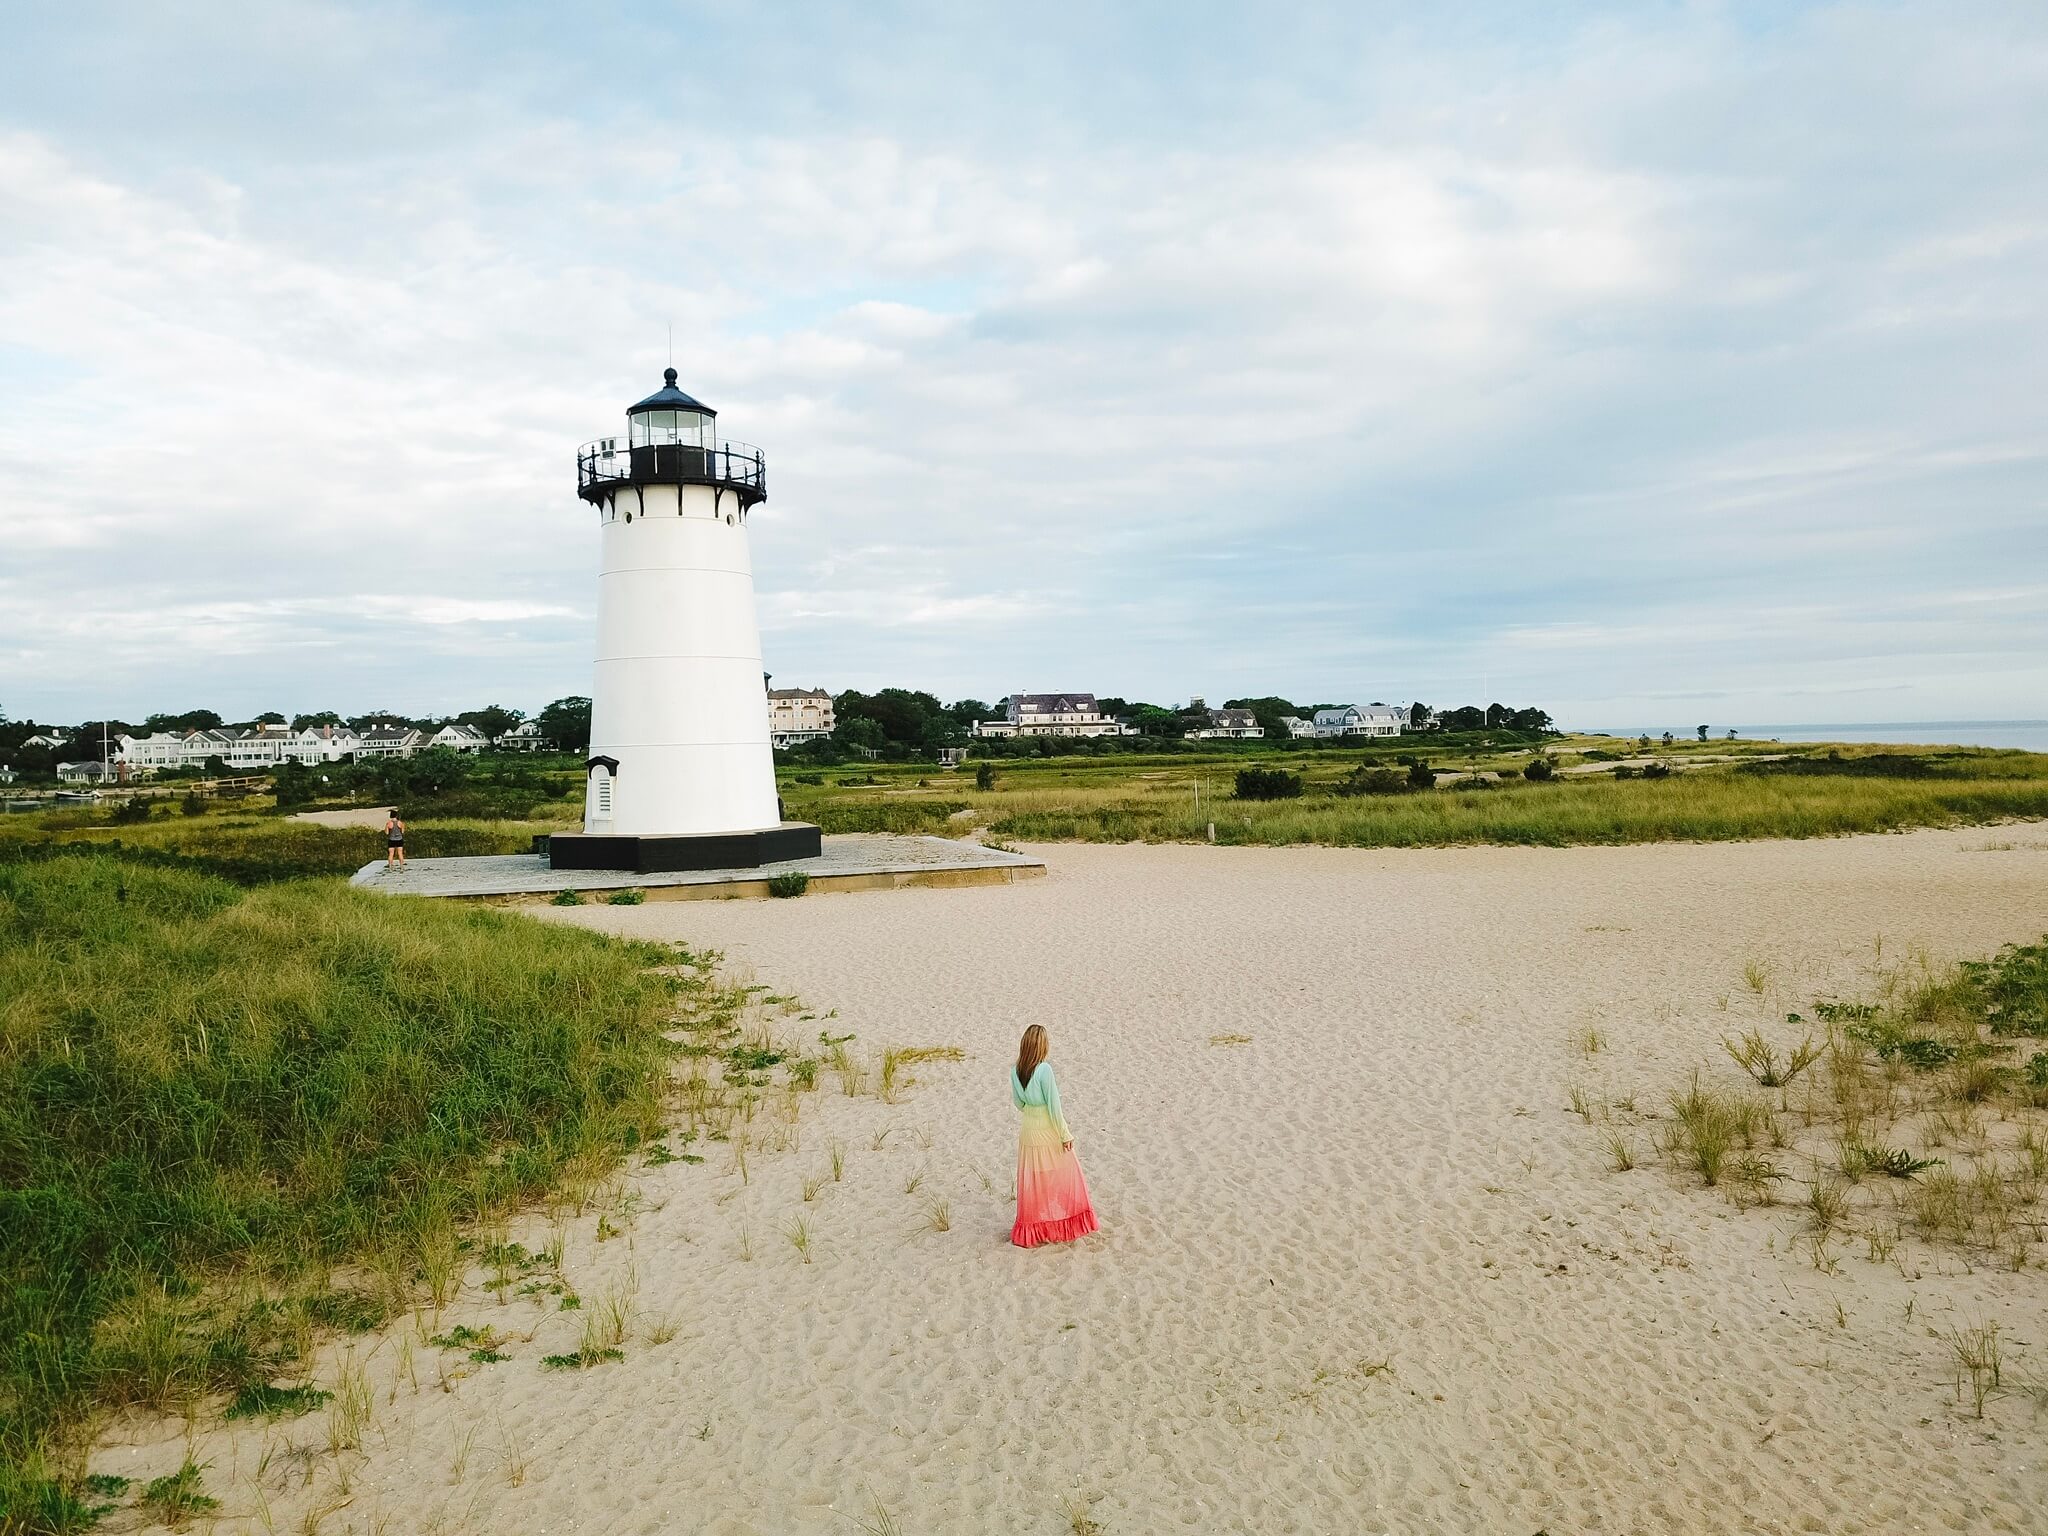 Review of our Stay at the Harbor View Hotel in Martha's Vineyard